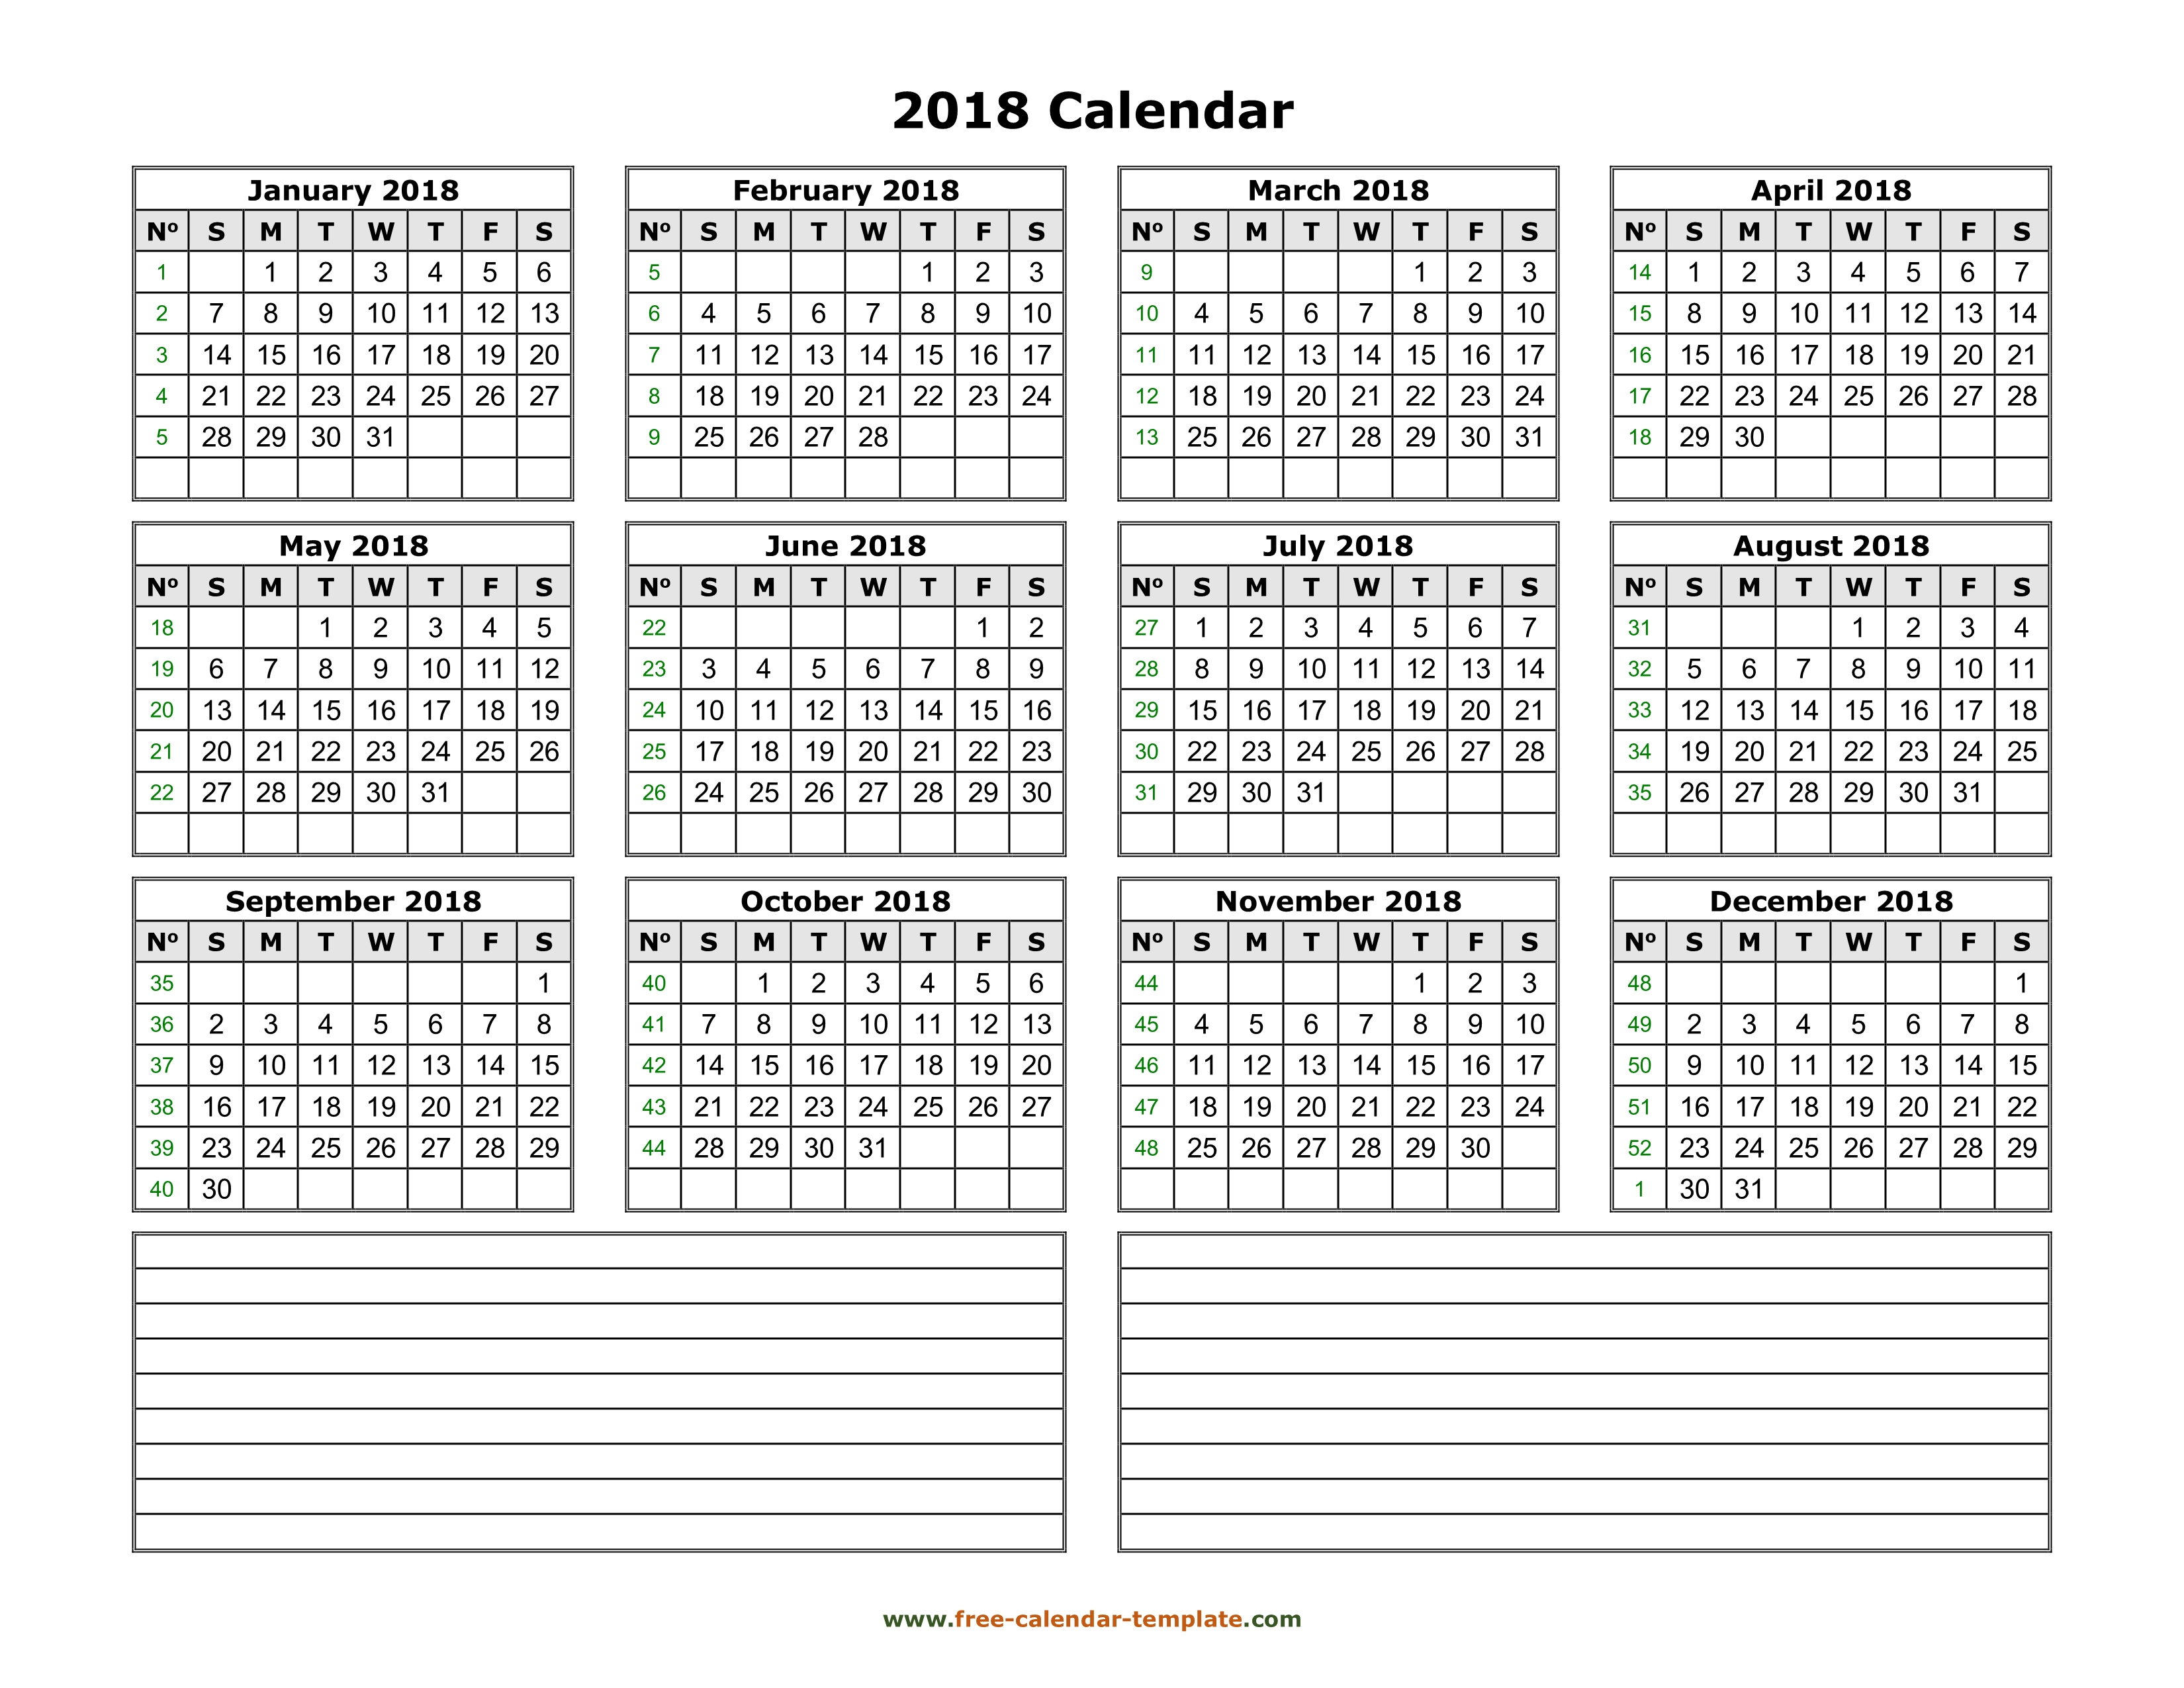 Yearly 2018 Calendar Printable With Space For Notes | Free